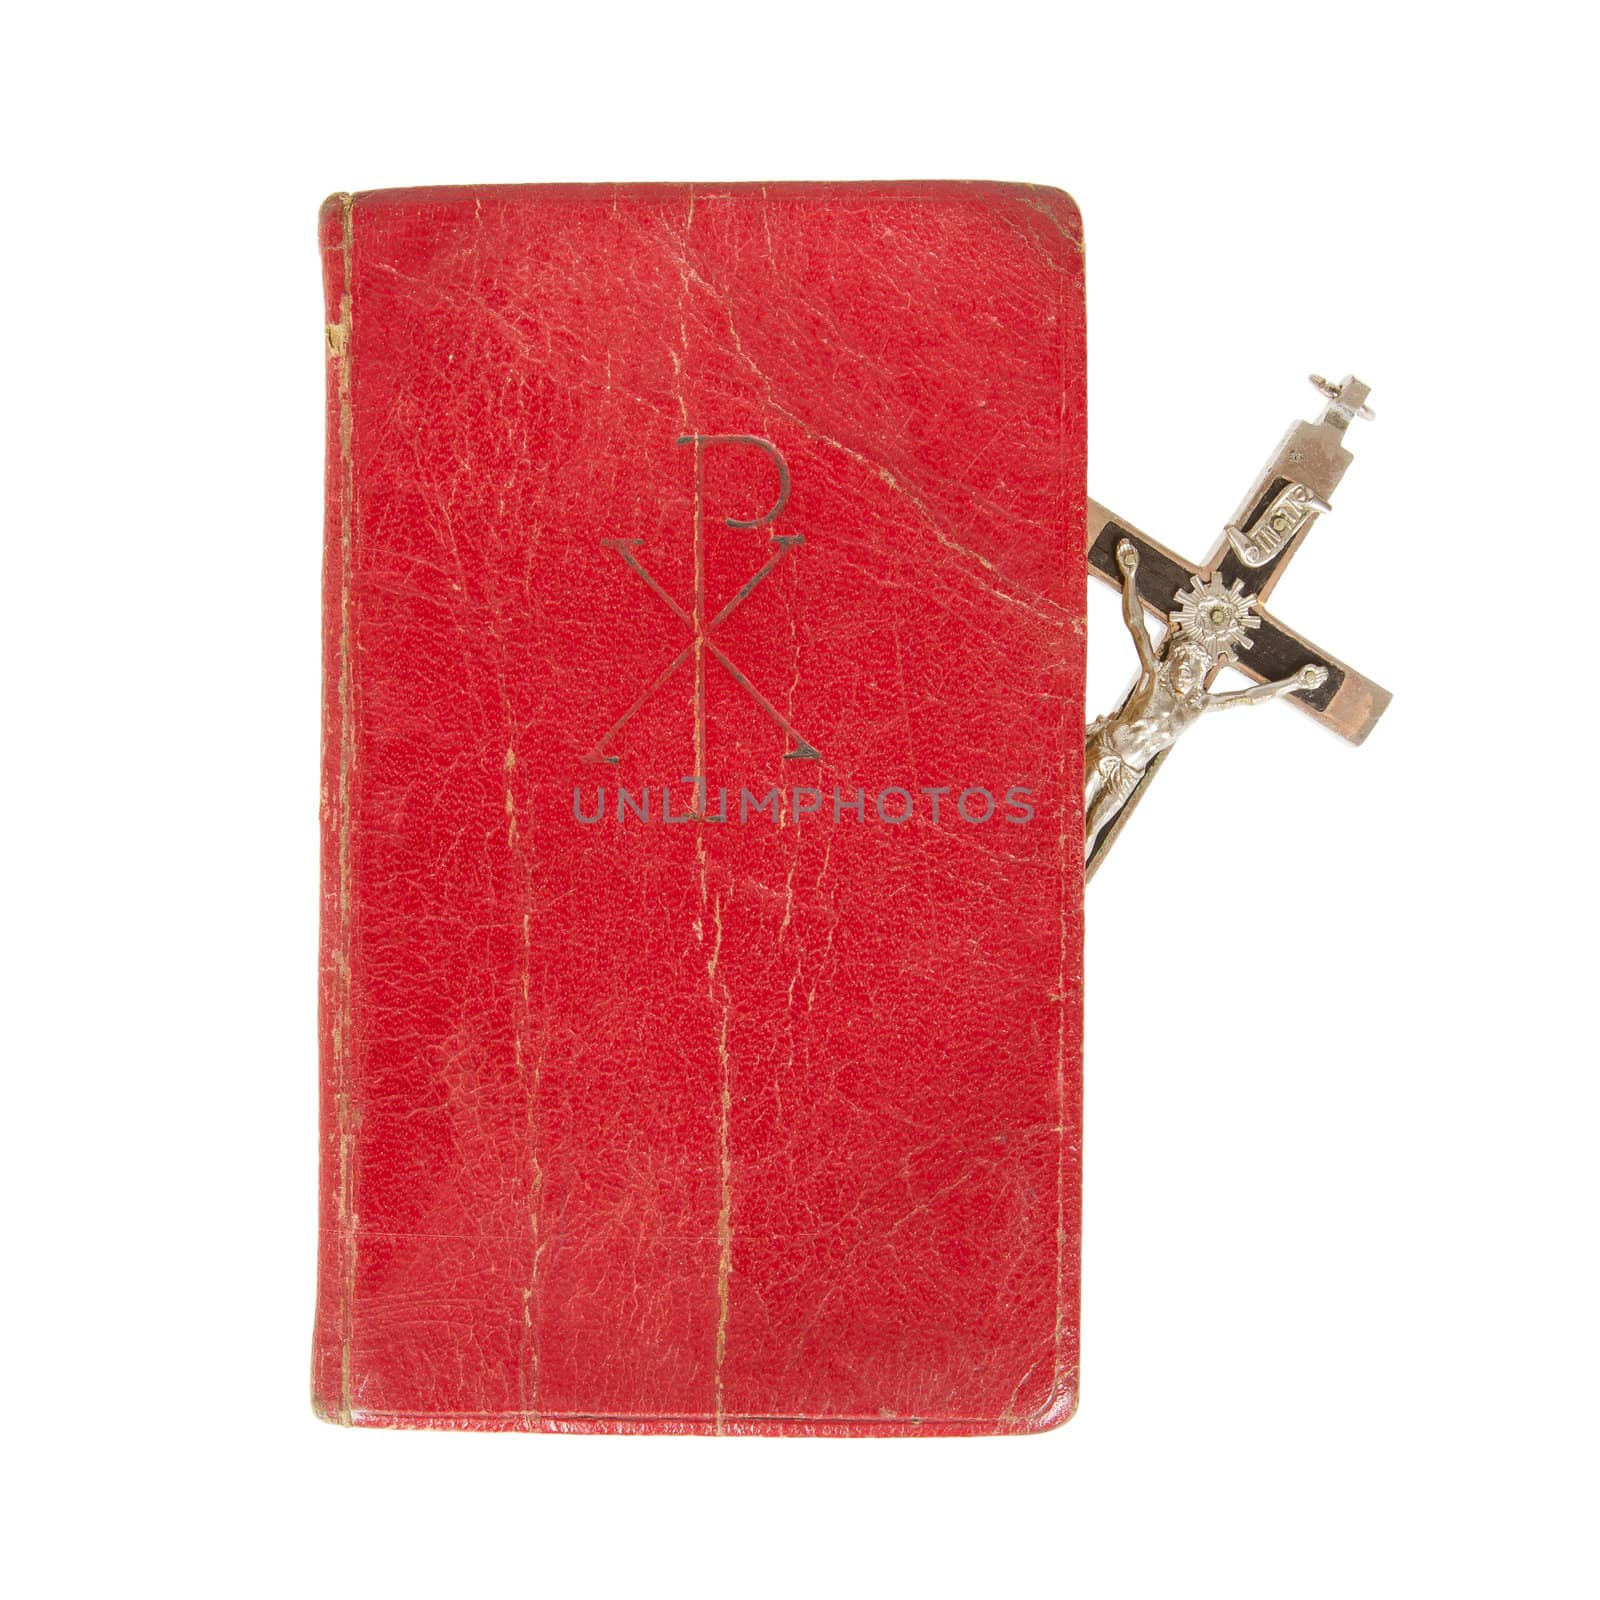 Old antique bible and cross on a white background, isolated